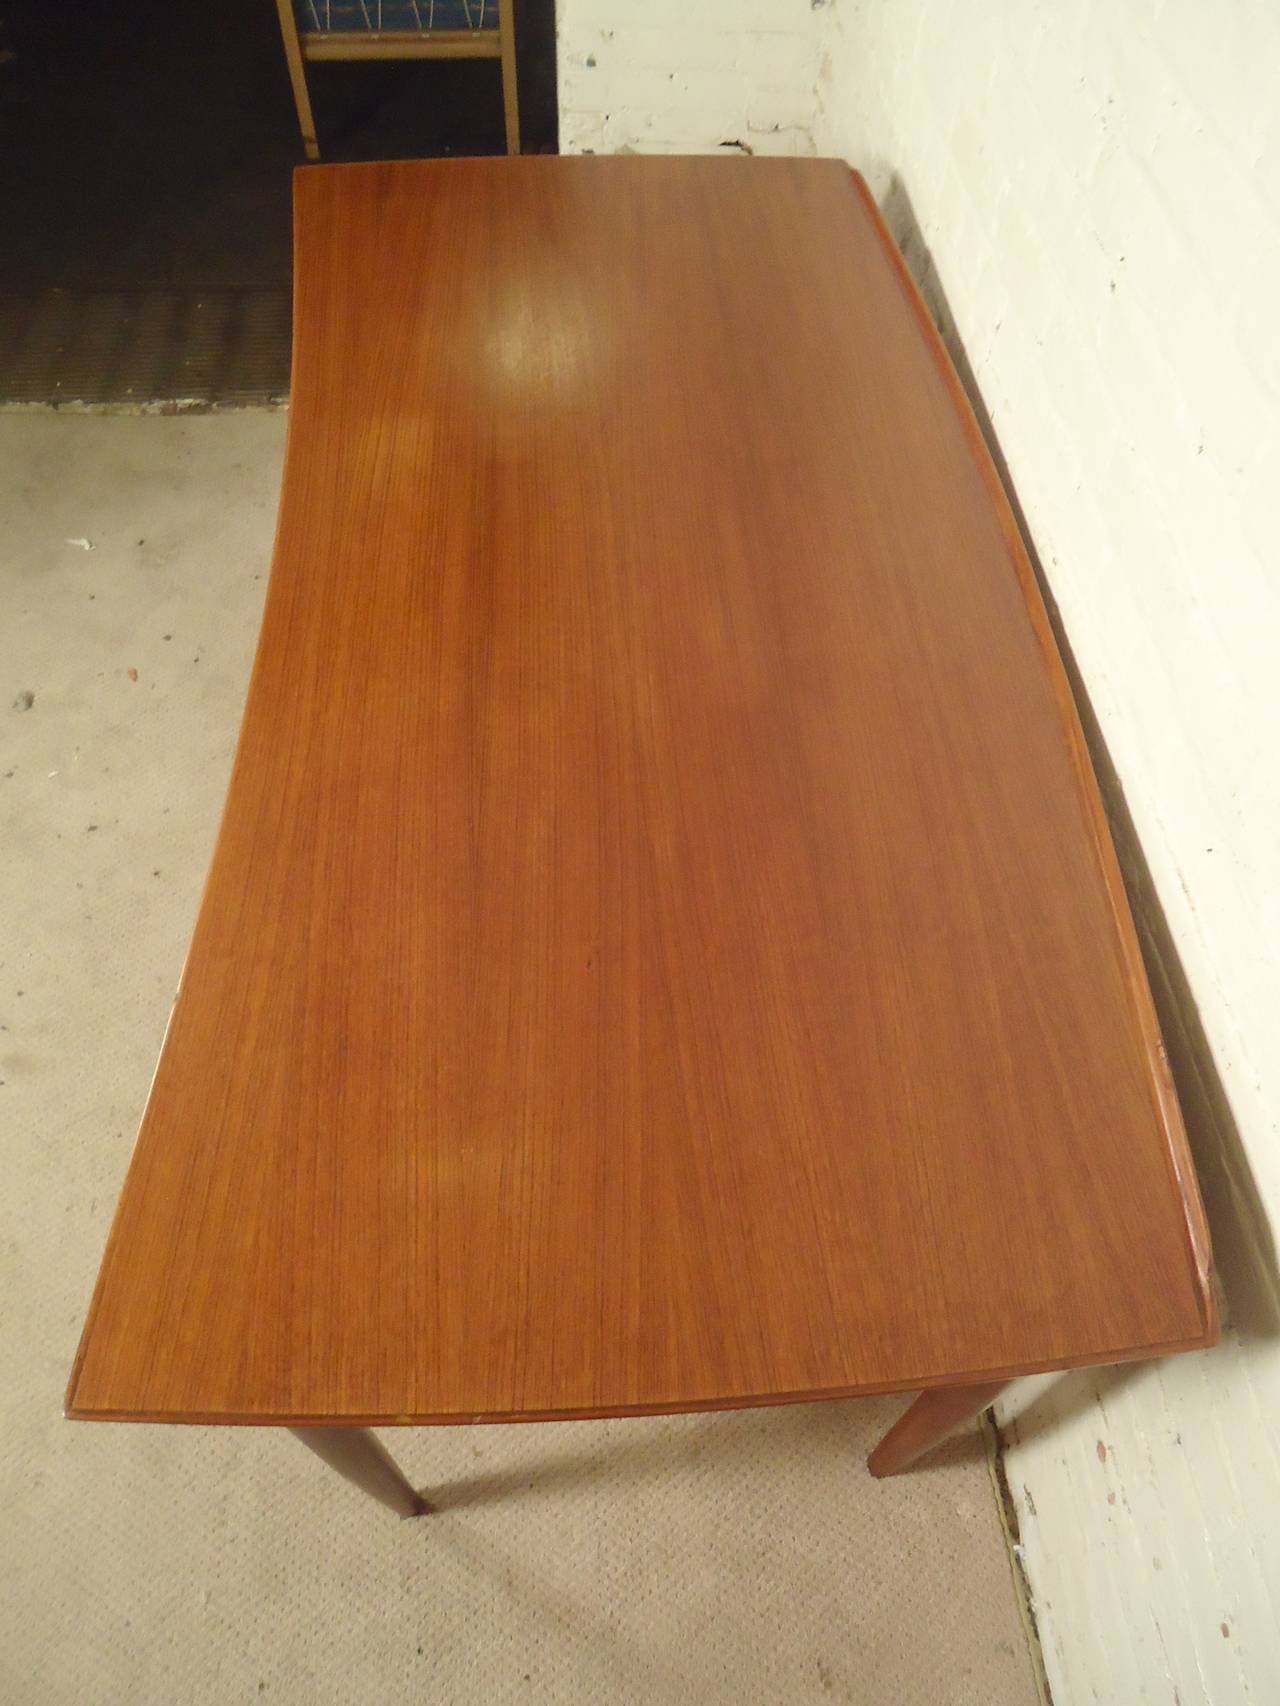 Gorgeous mid-century desk with finished back. Unique curved top with back lip, seven drawers with sculpted handles and tapered legs, with teak grain throughout.
Kneehole: 22w 16d 28h

(Please confirm item location - NY or NJ - with dealer)